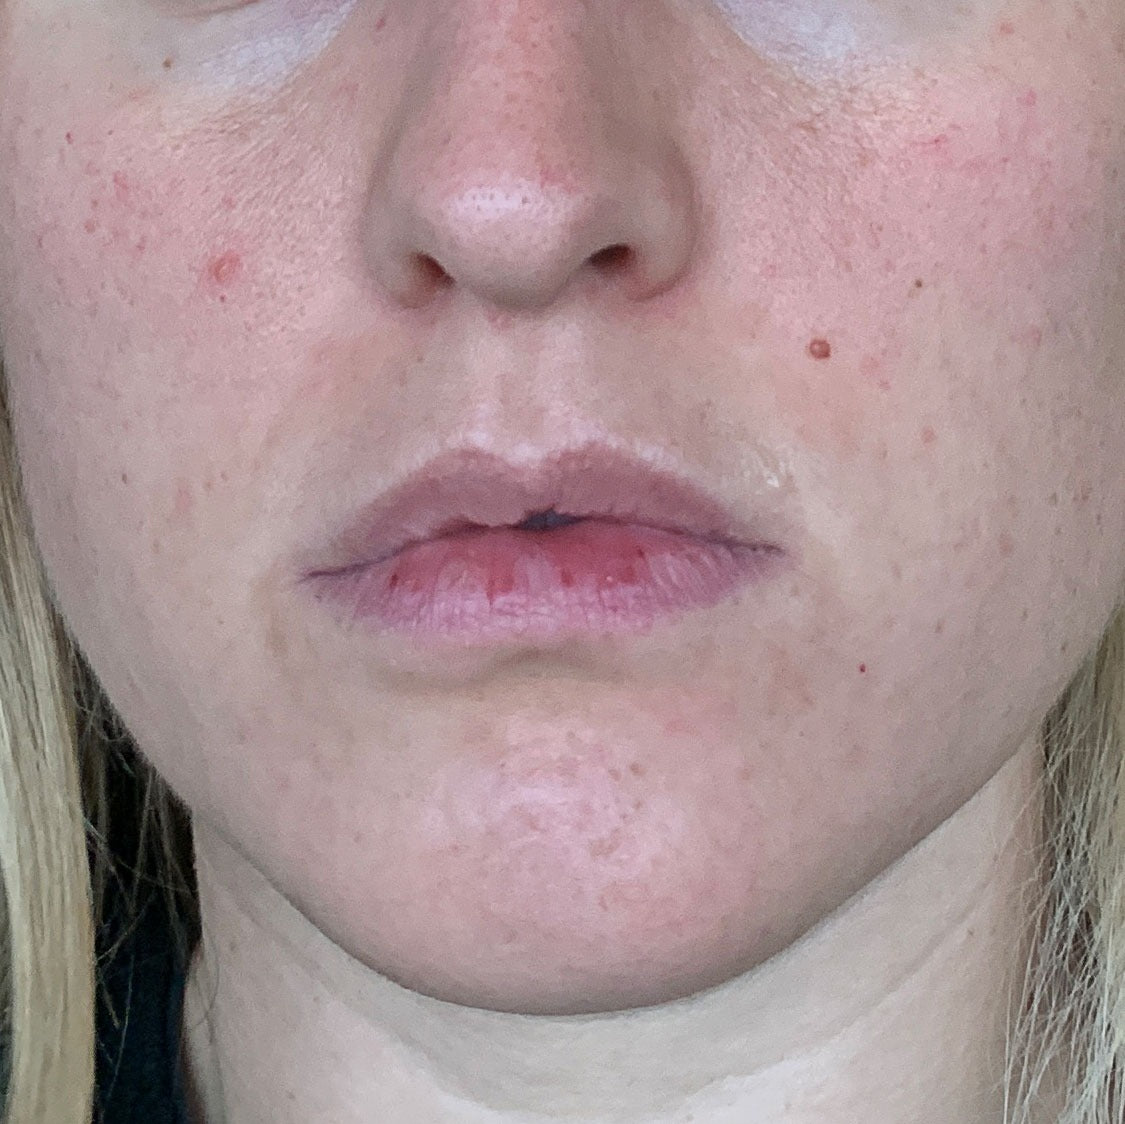 close-up image of a person's face in a before picture to showcase their irritated skin condition before treatment